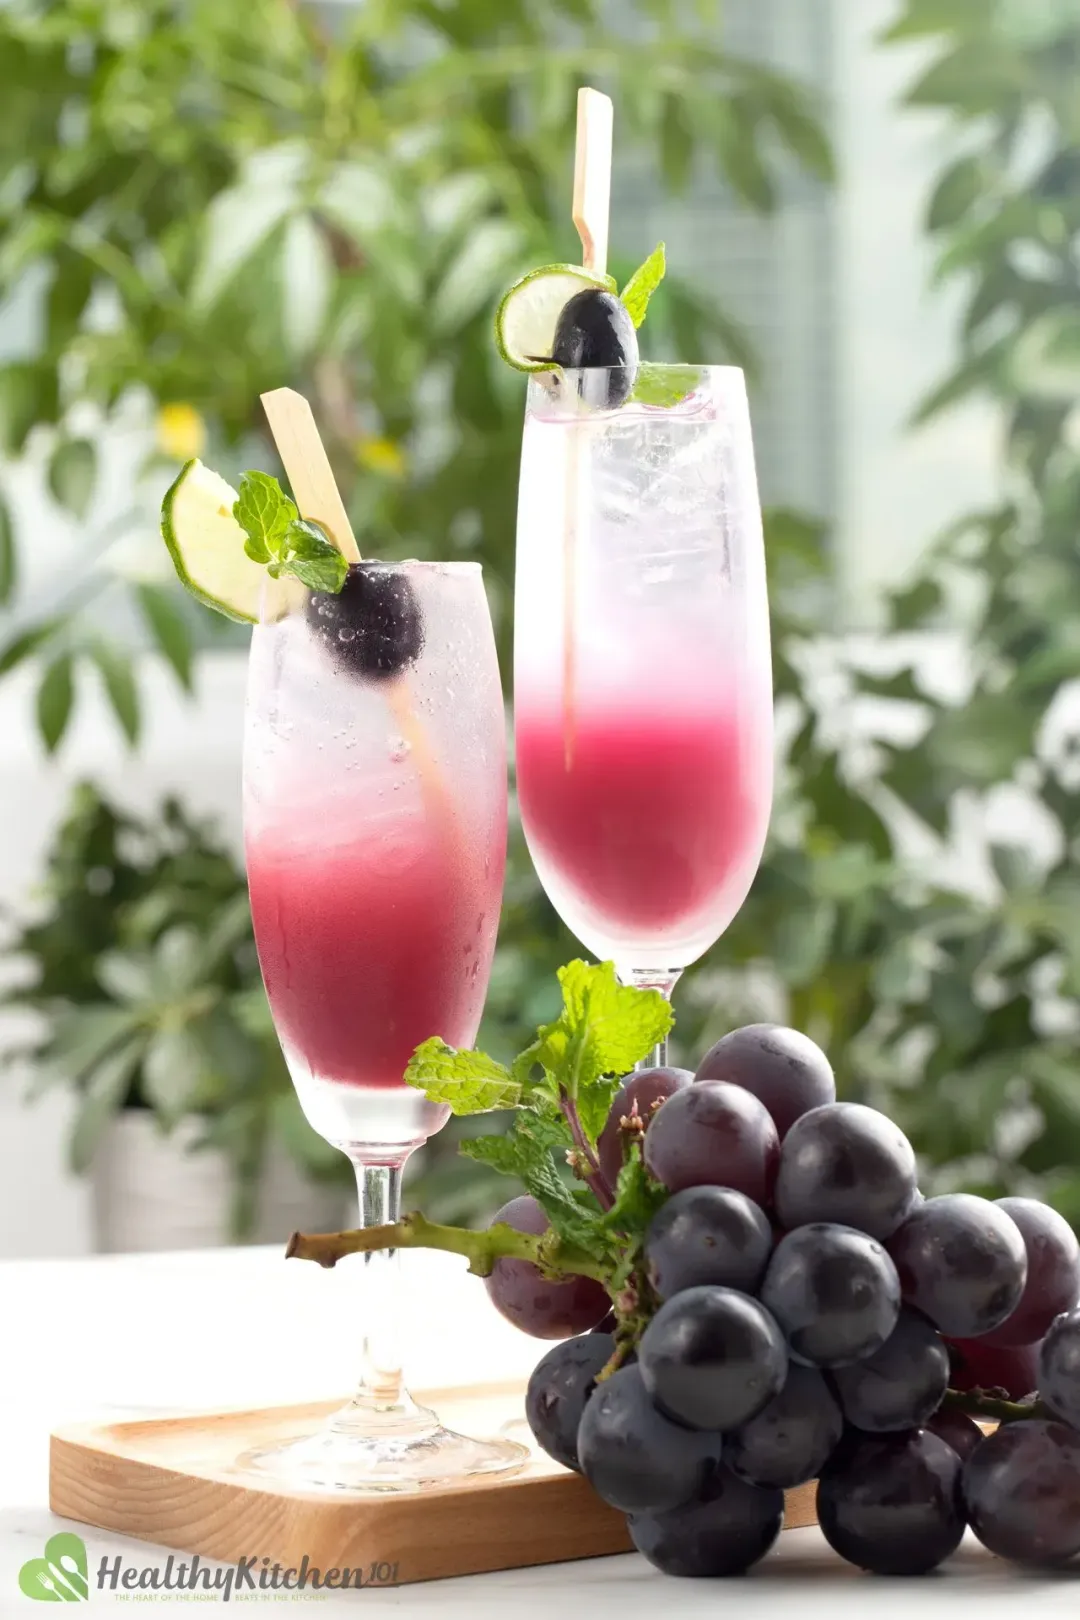 Vodka and Grape Juice Recipe: Making the Golf Club’s Cocktail at Home